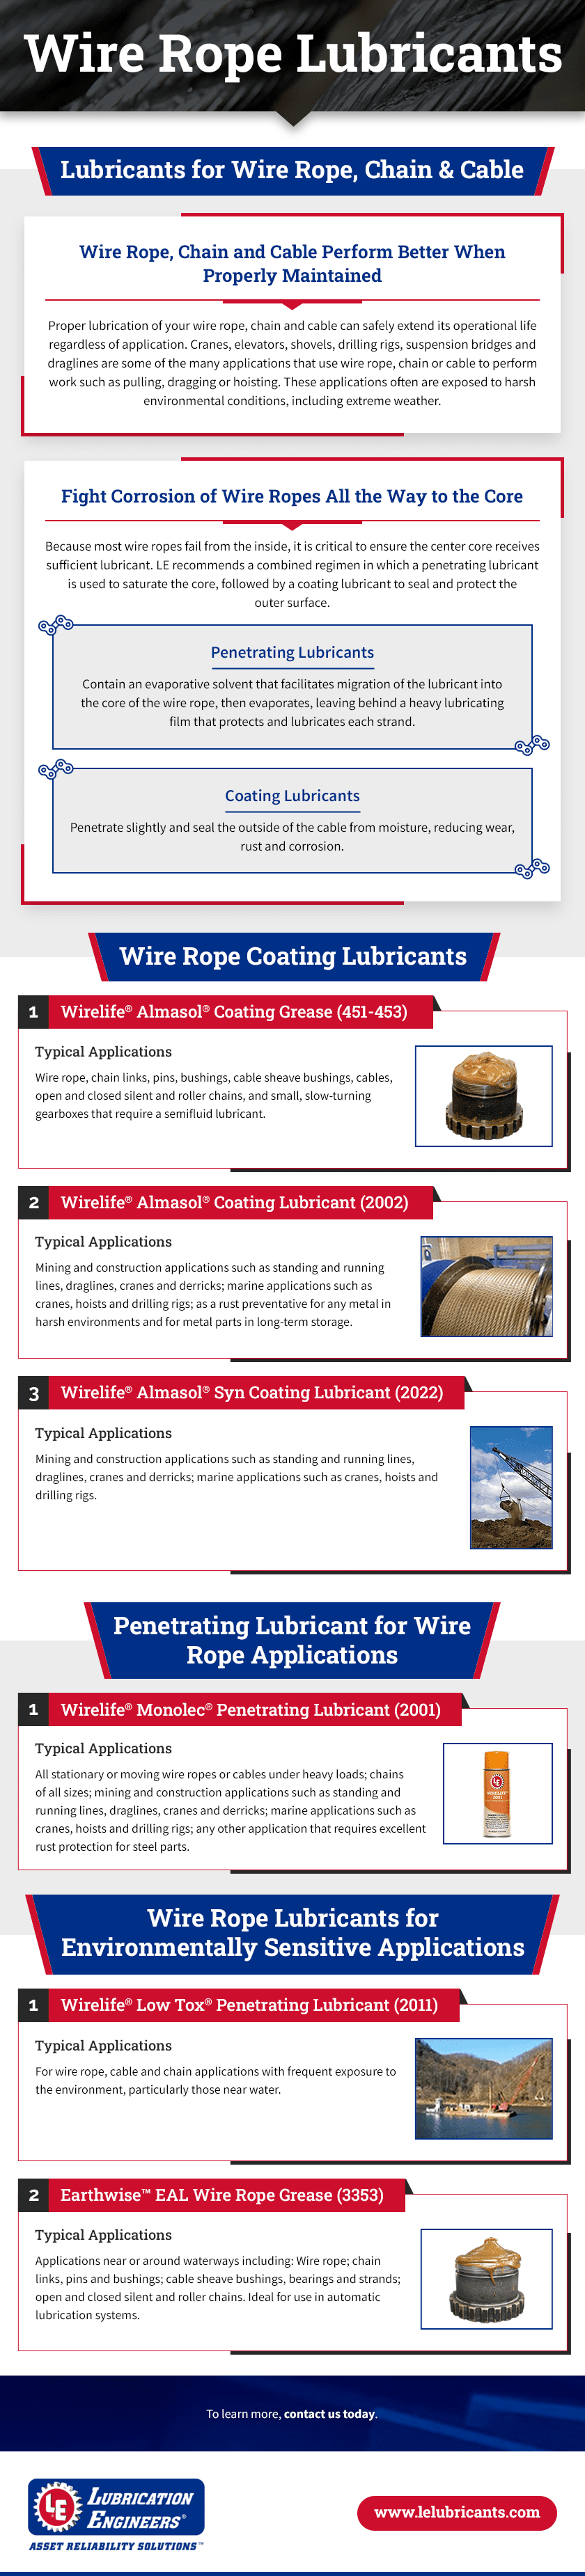 Wire Rope Lubricants